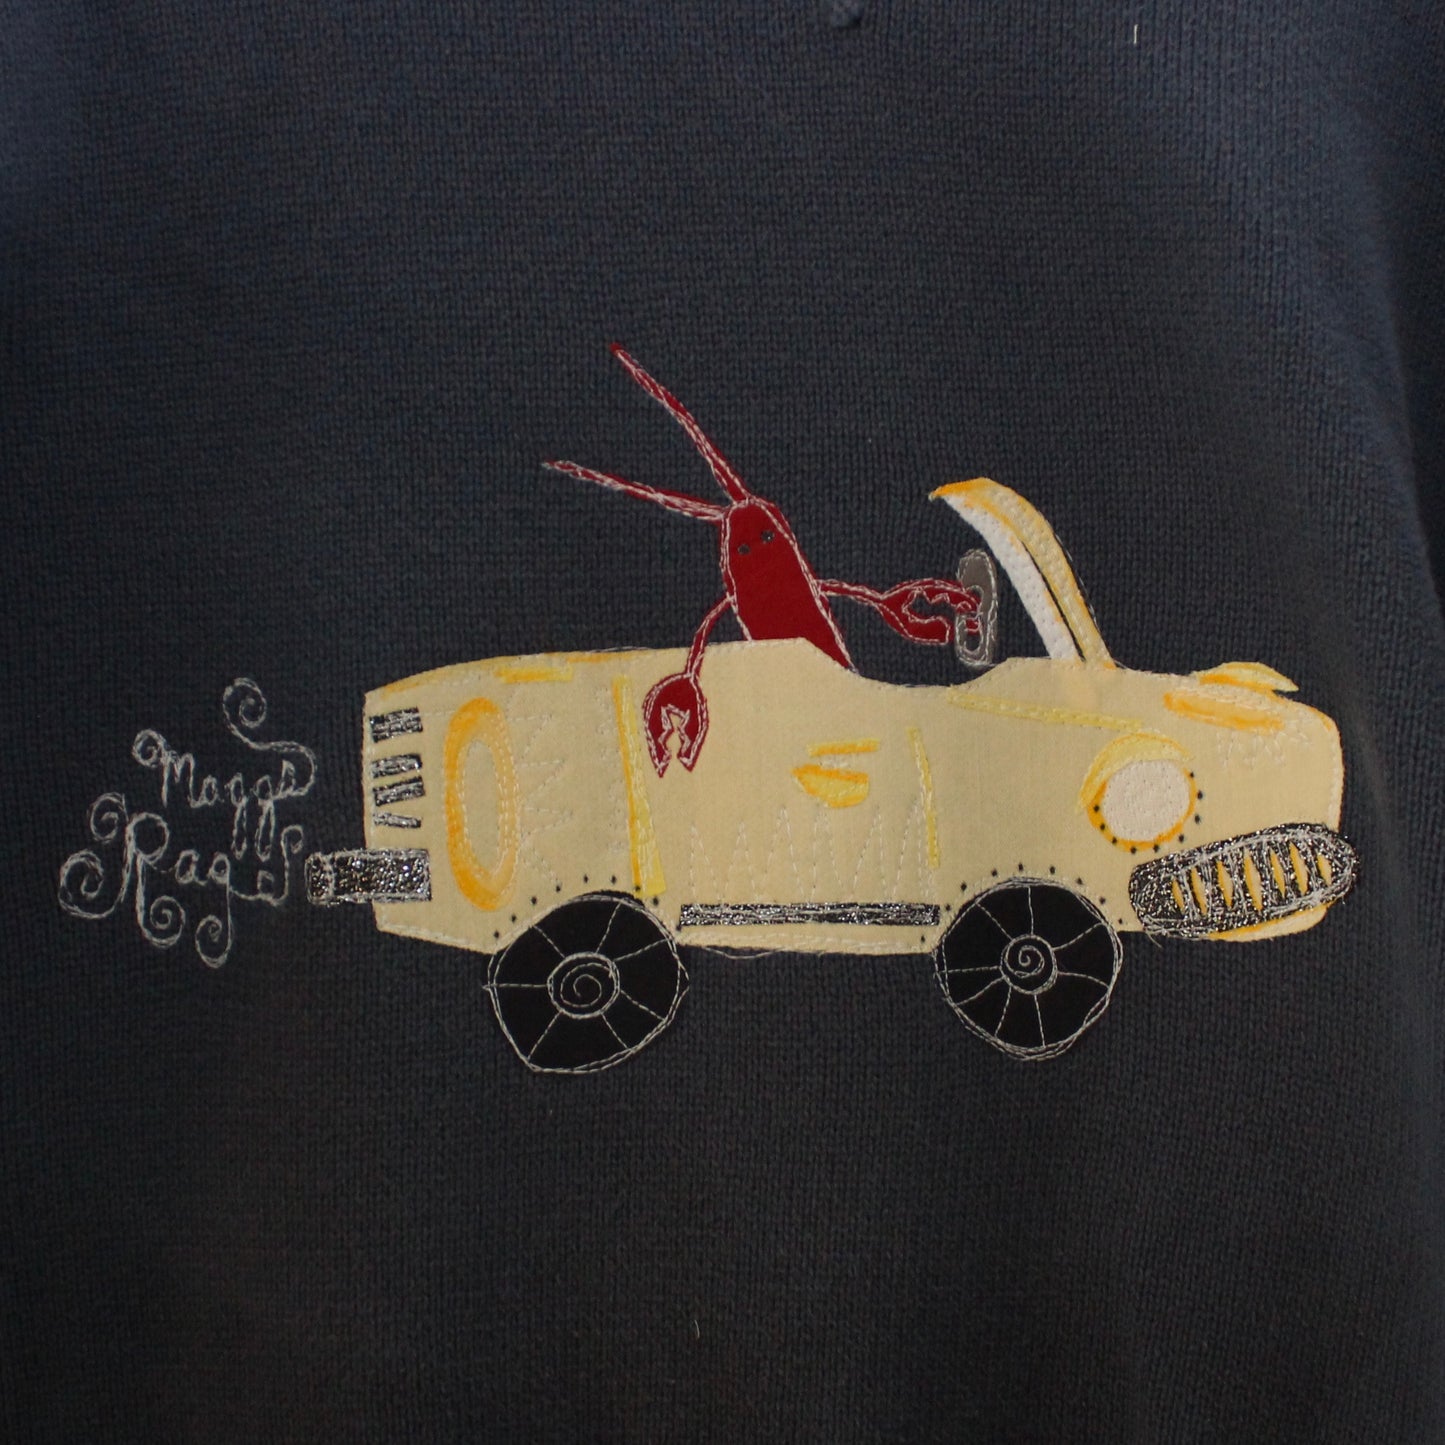 Lobster on the road sweater(XL)